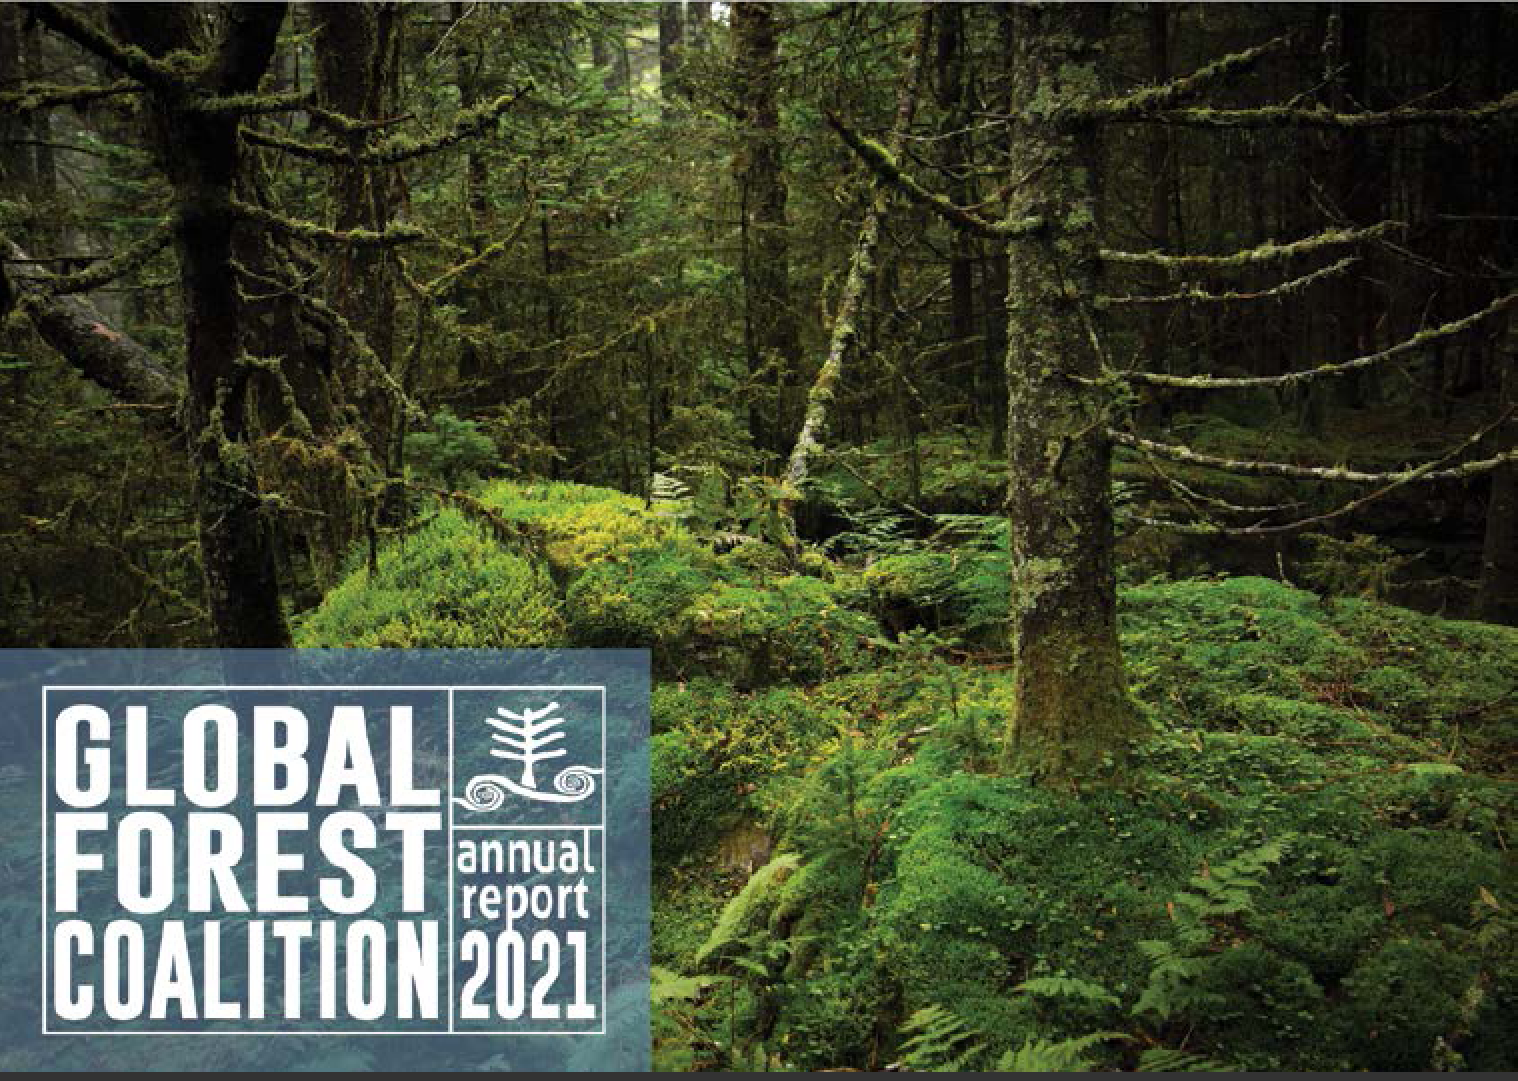 The Global Forest Coalition 2021 Annual Report